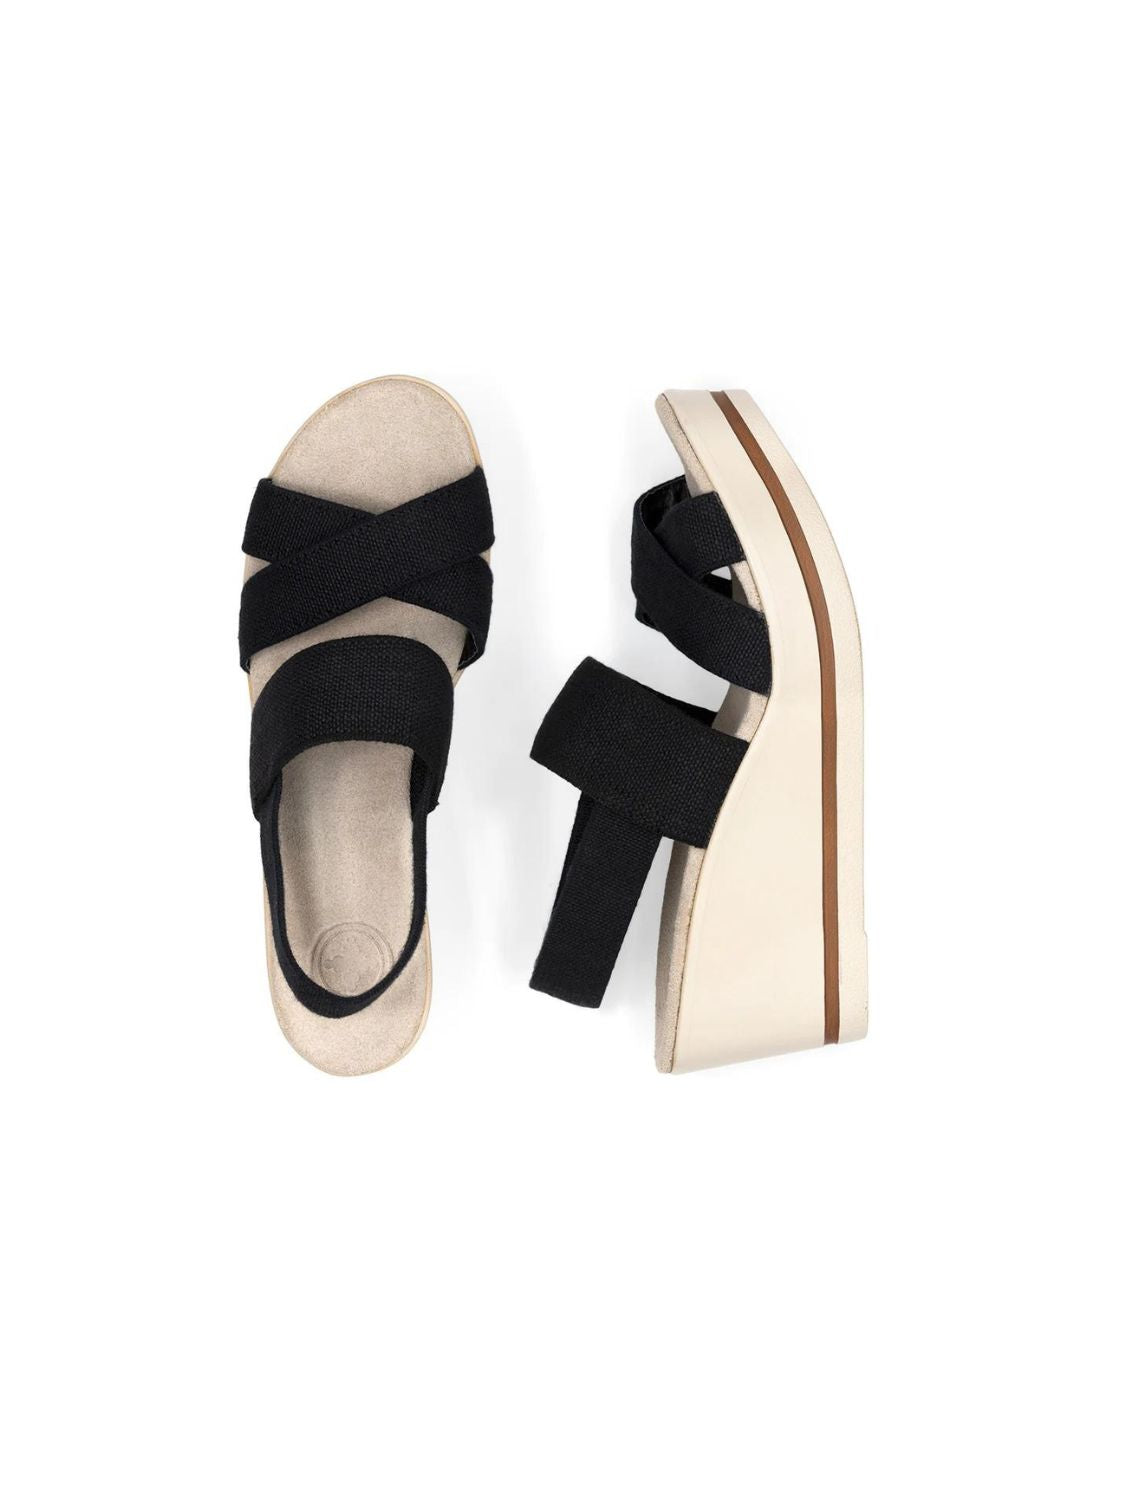 charleston shoe company pairs platform wedge in black-pair top and side view